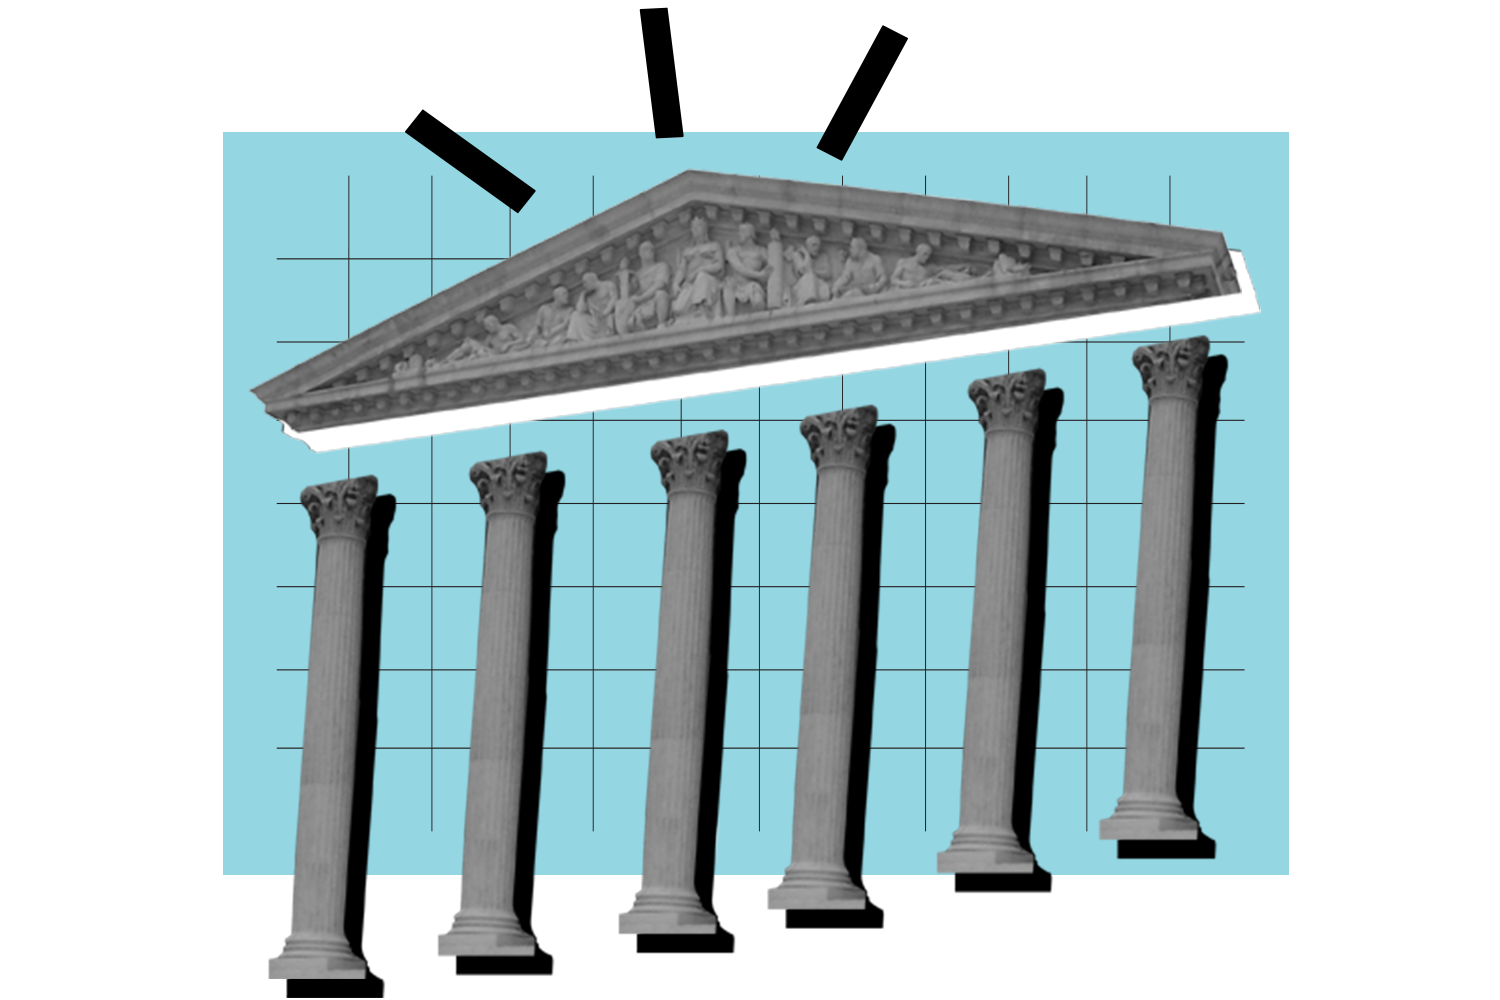 Court Cases collage. Elements include court pillars and light blue gridded rectangle.